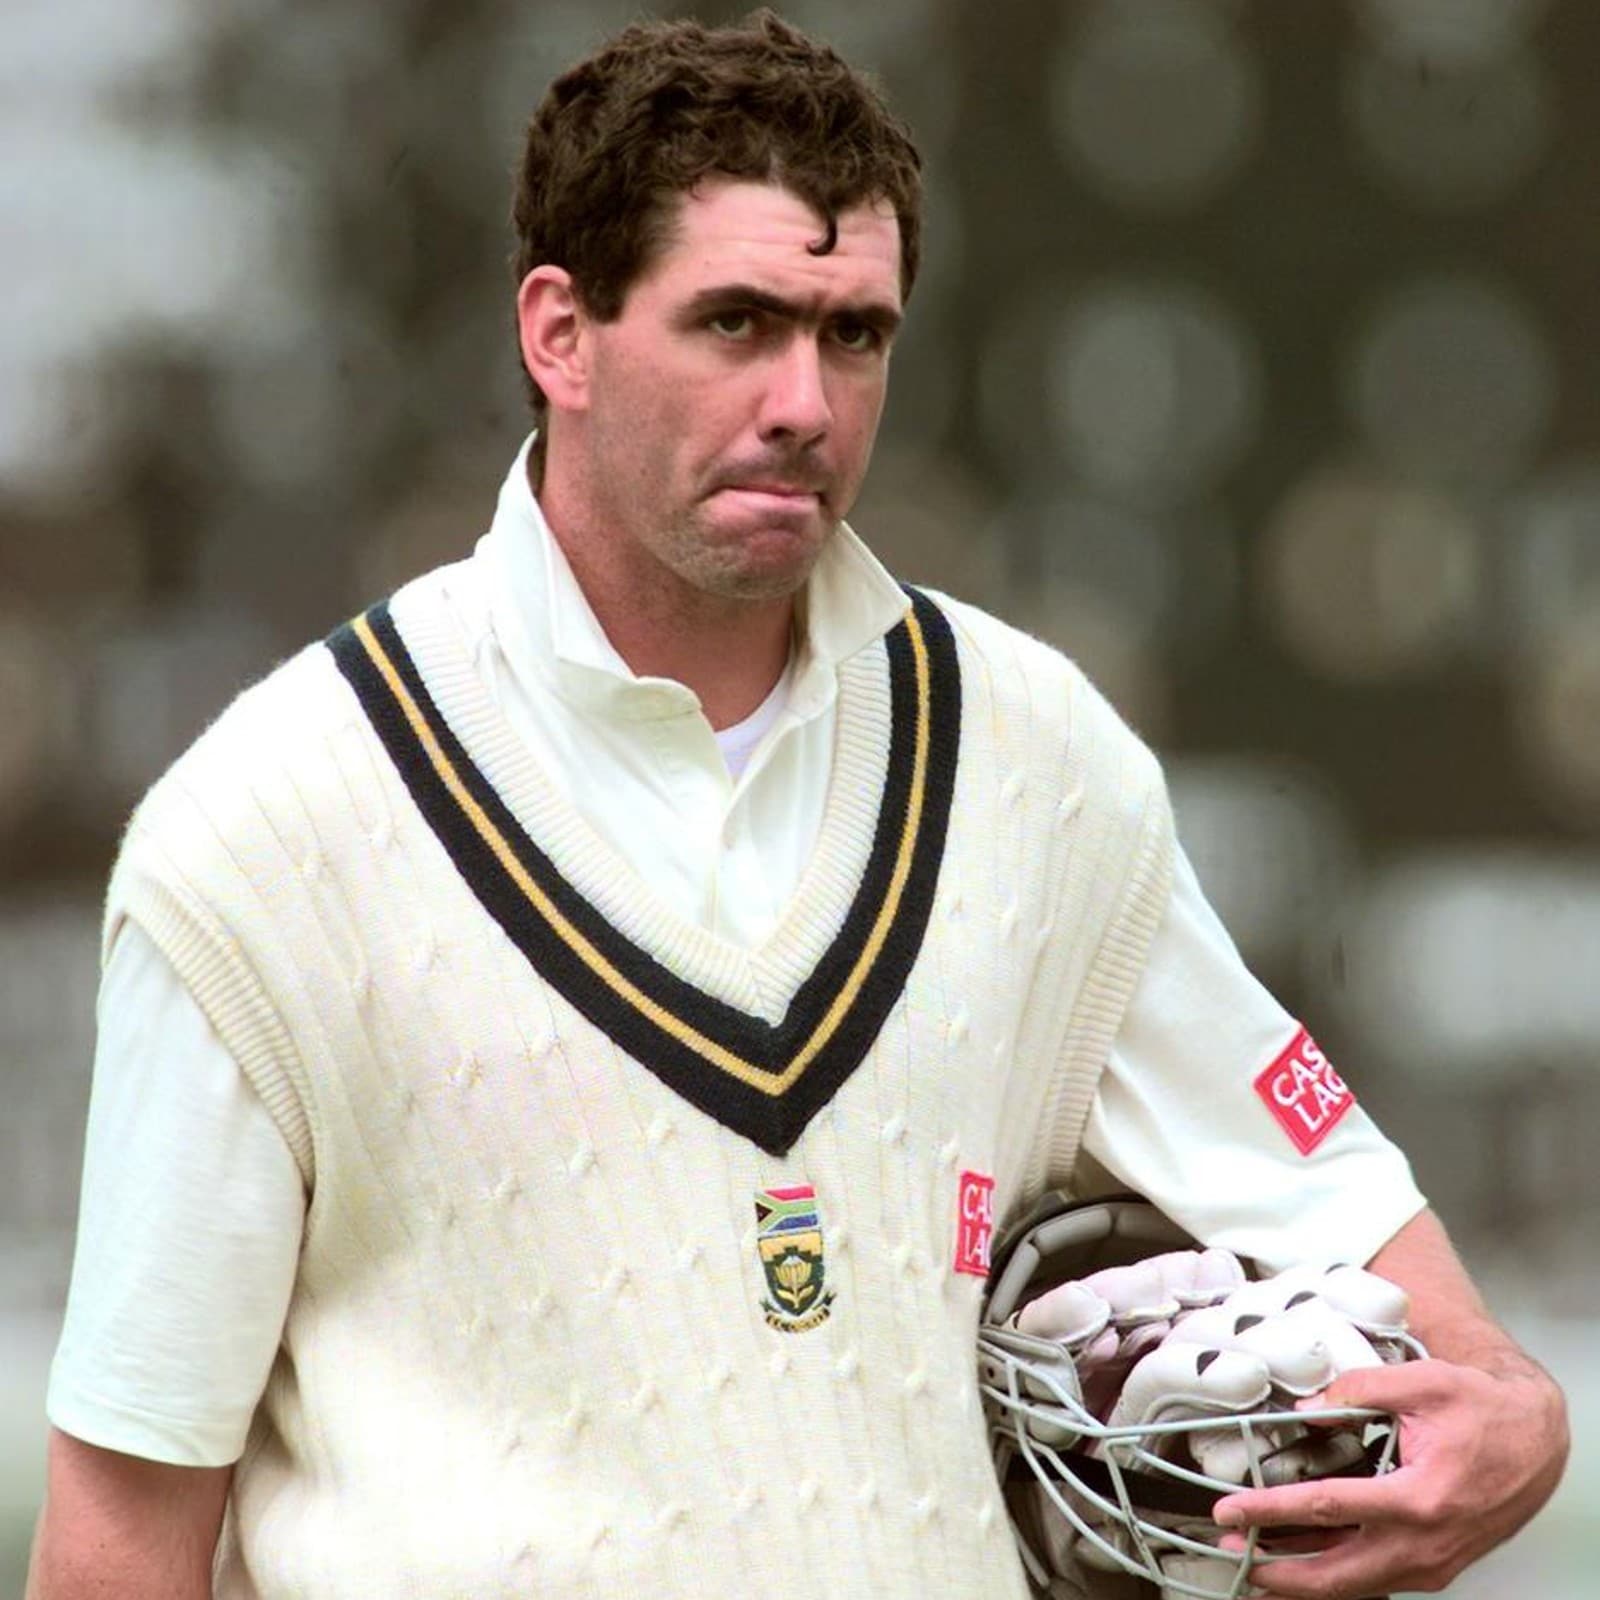 On This Day in 2002: Former South Africa Captain Hansie Cronje Died in a  Plane Crash